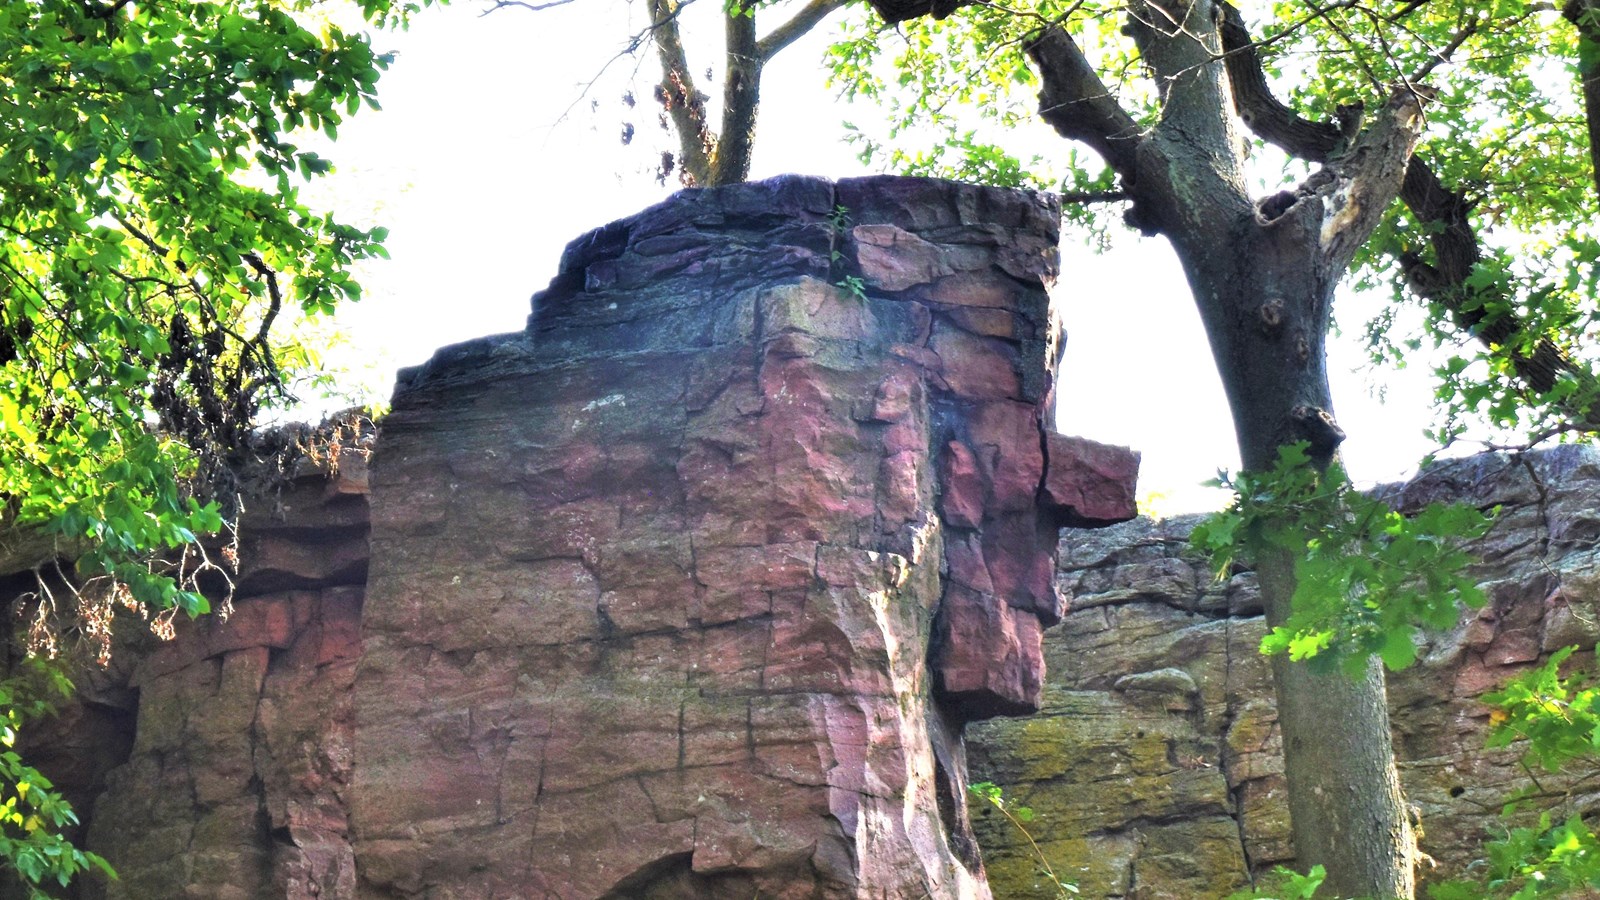 Stone column that resemble the profile of a face; surrounded by trees.